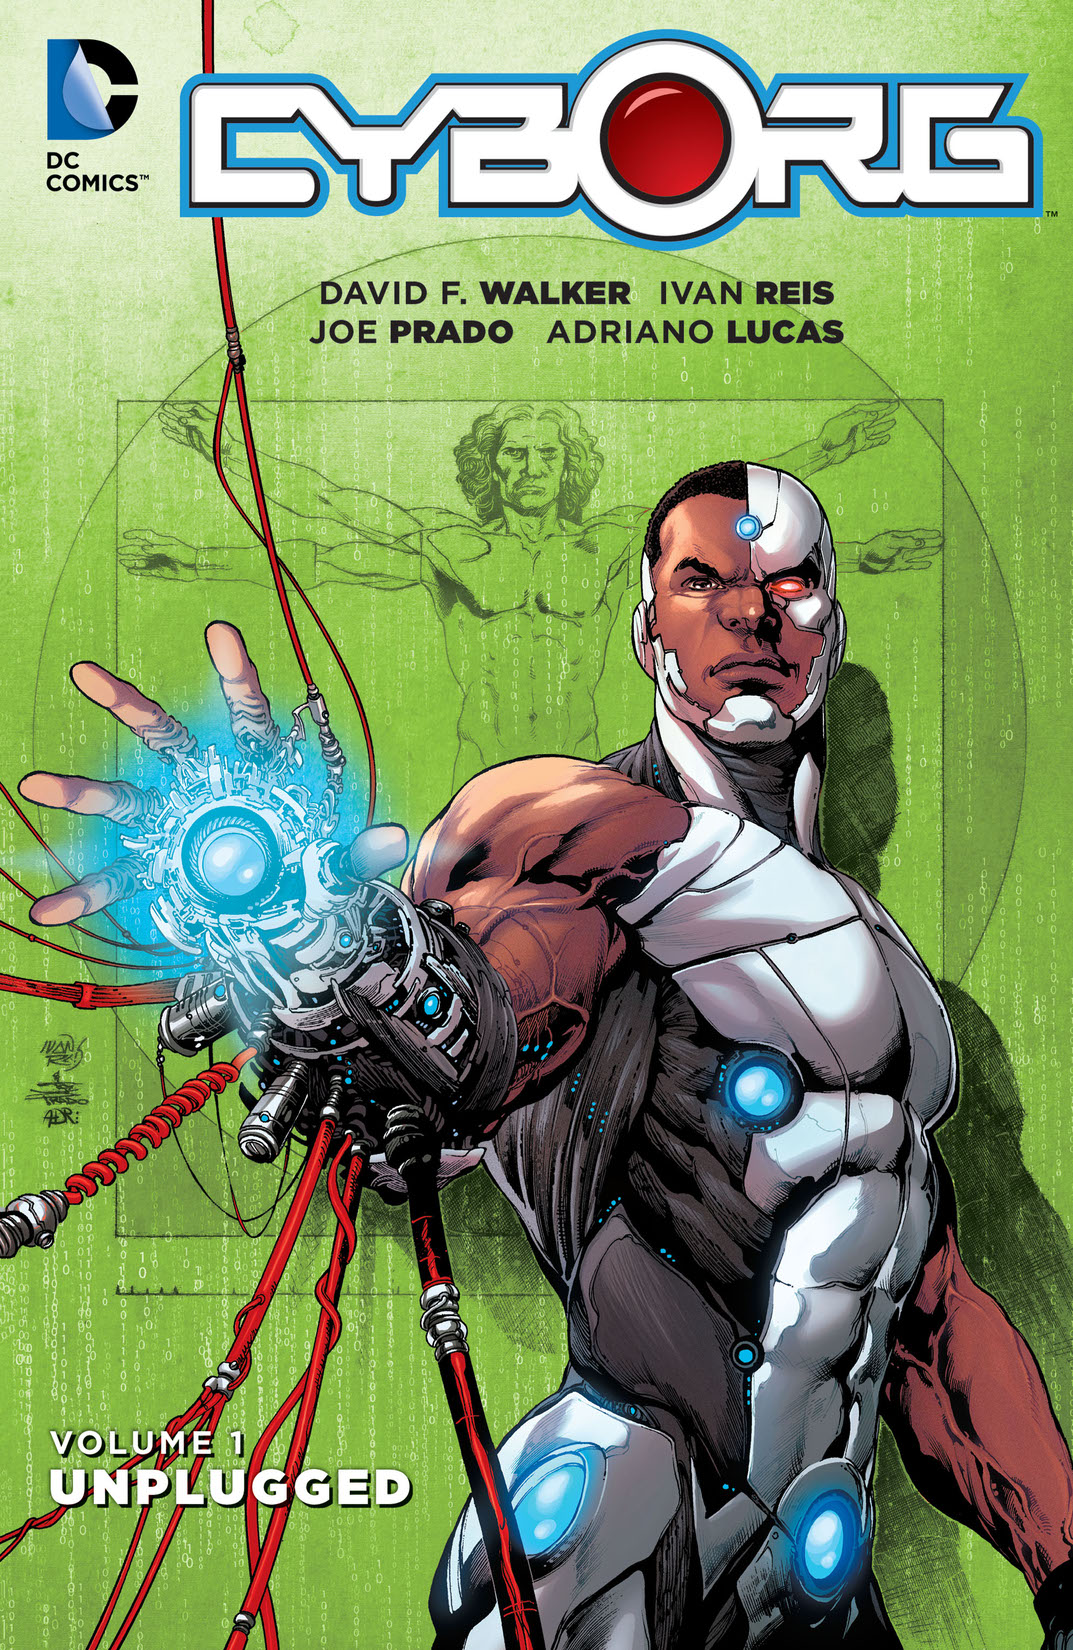 Cyborg Vol. 1: Unplugged preview images